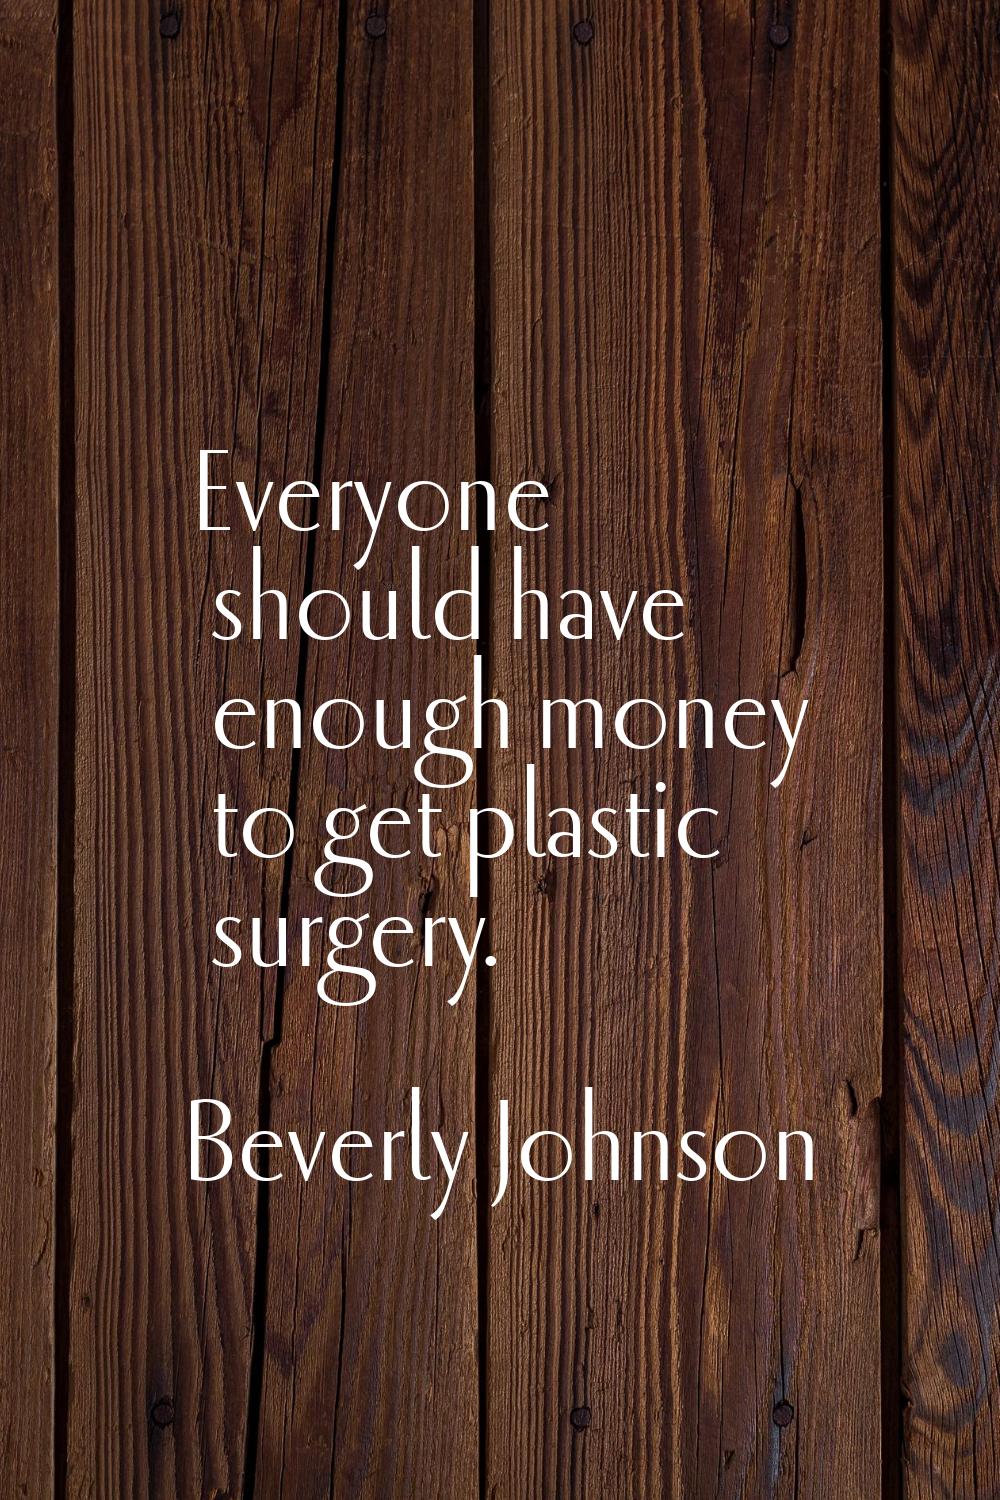 Everyone should have enough money to get plastic surgery.